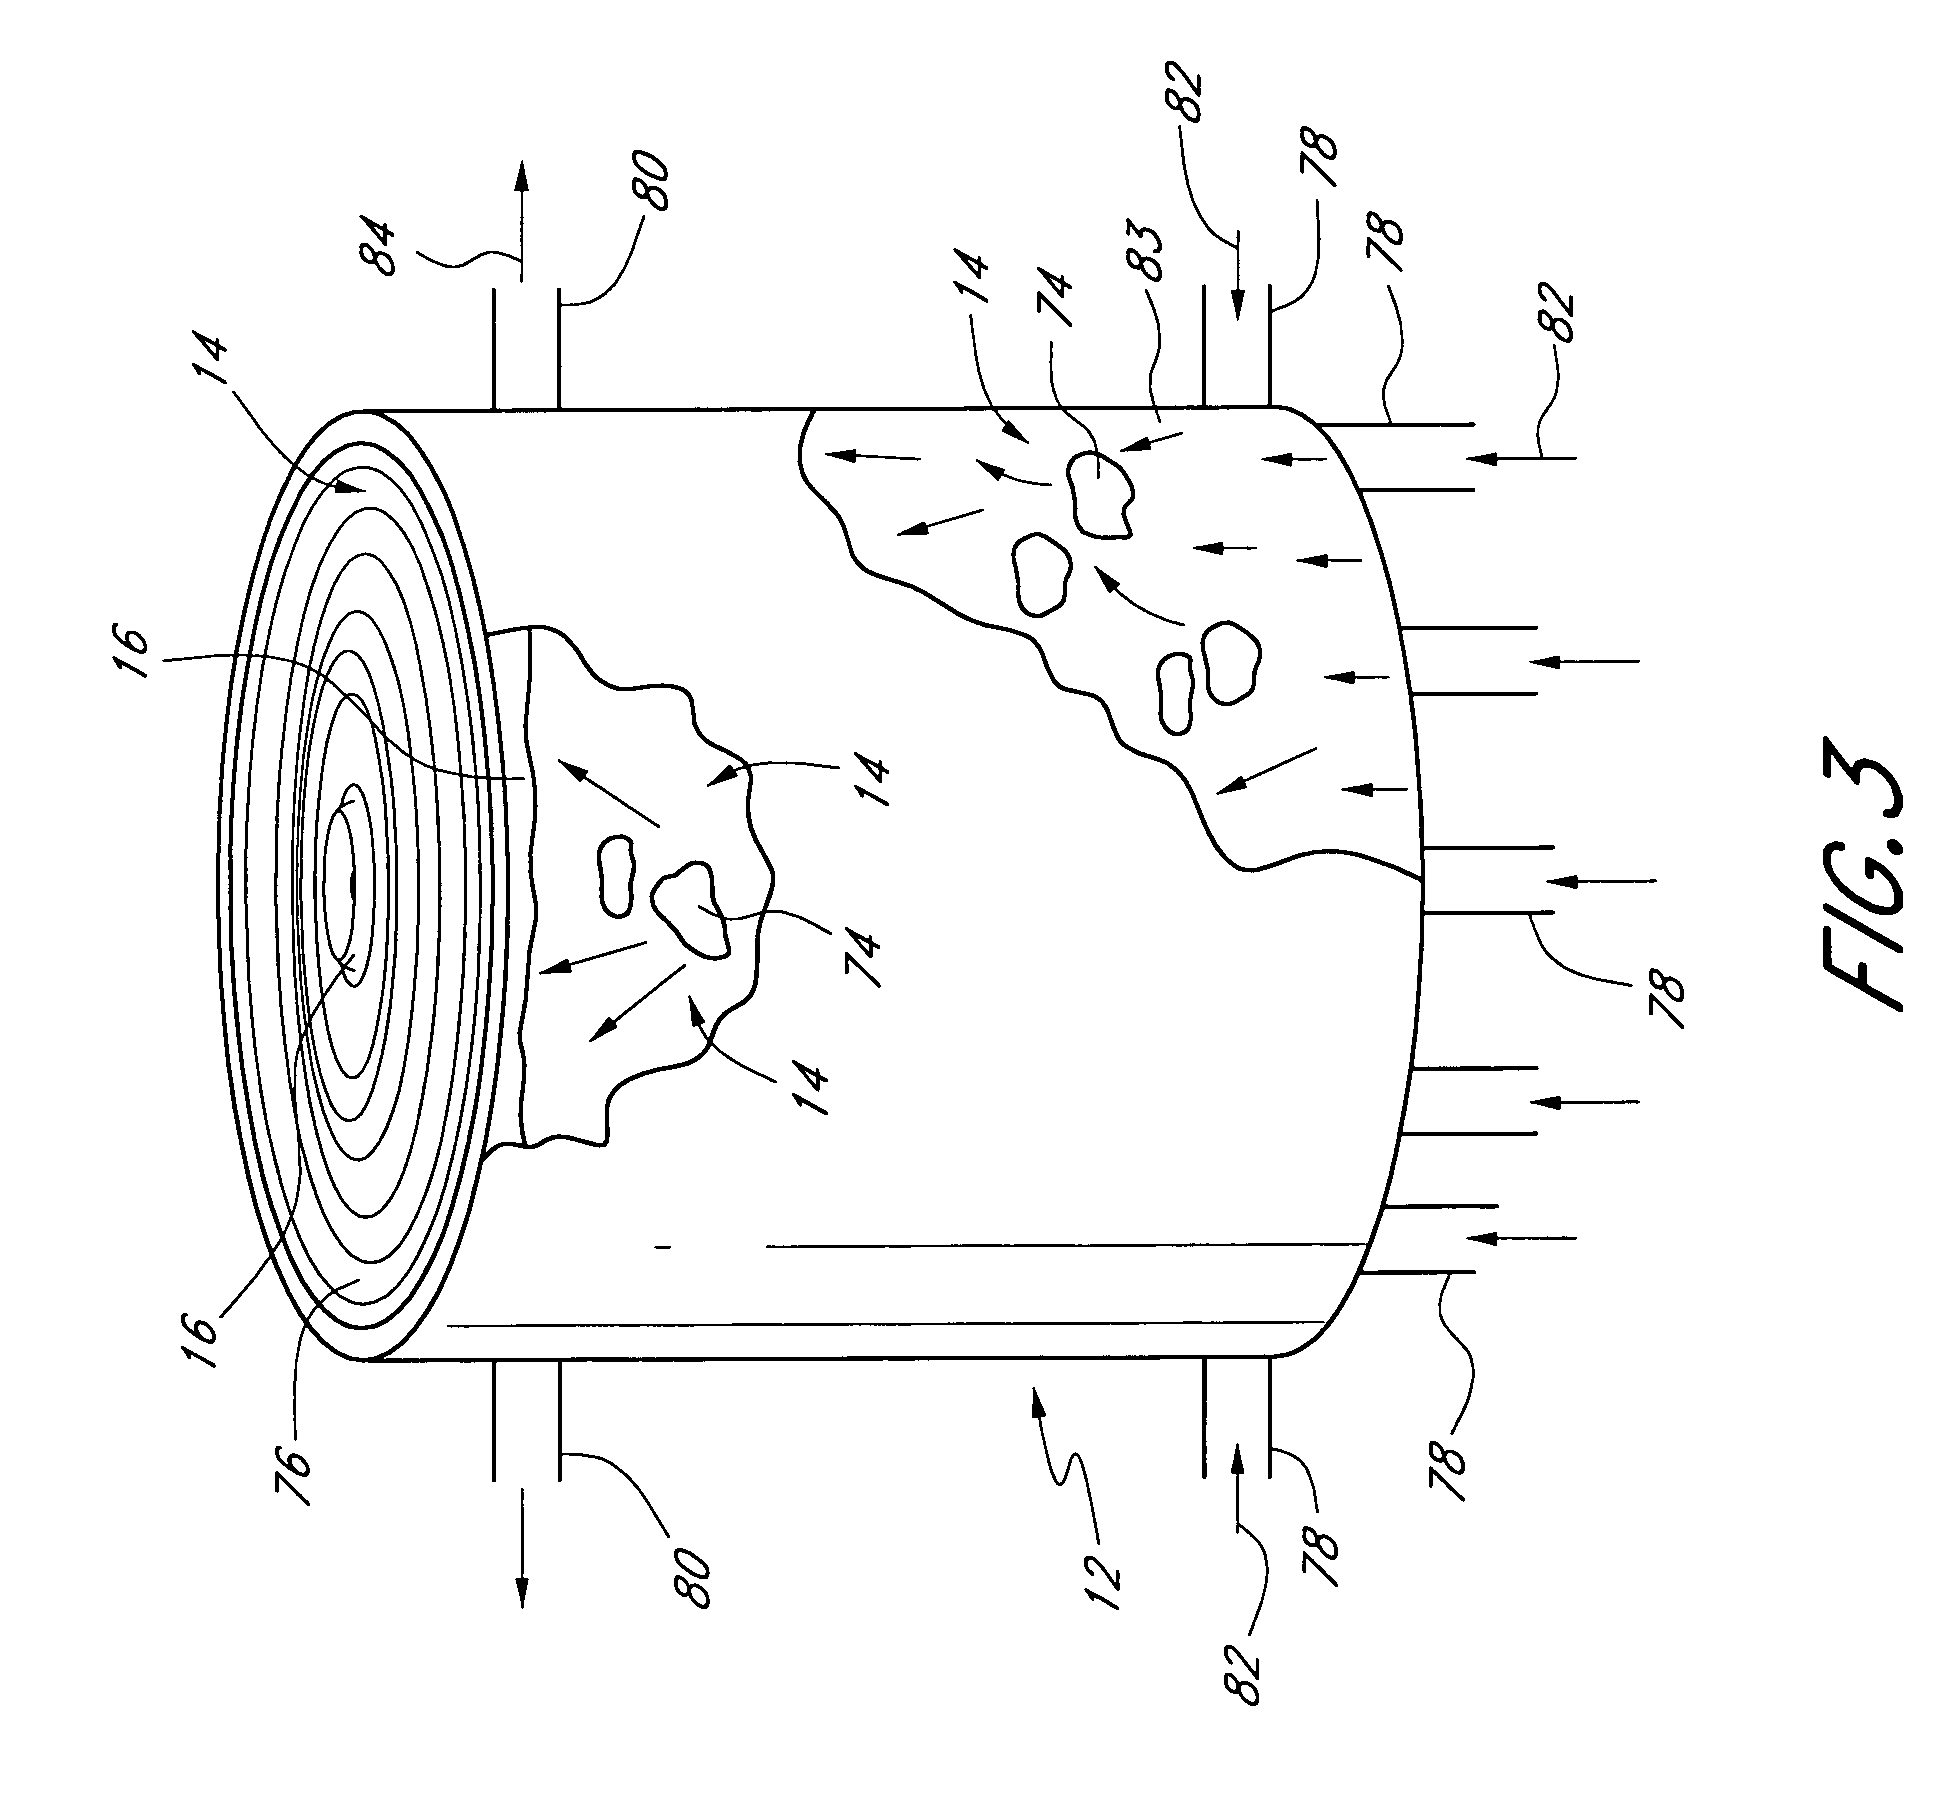 Systems and methods for controlling foaming